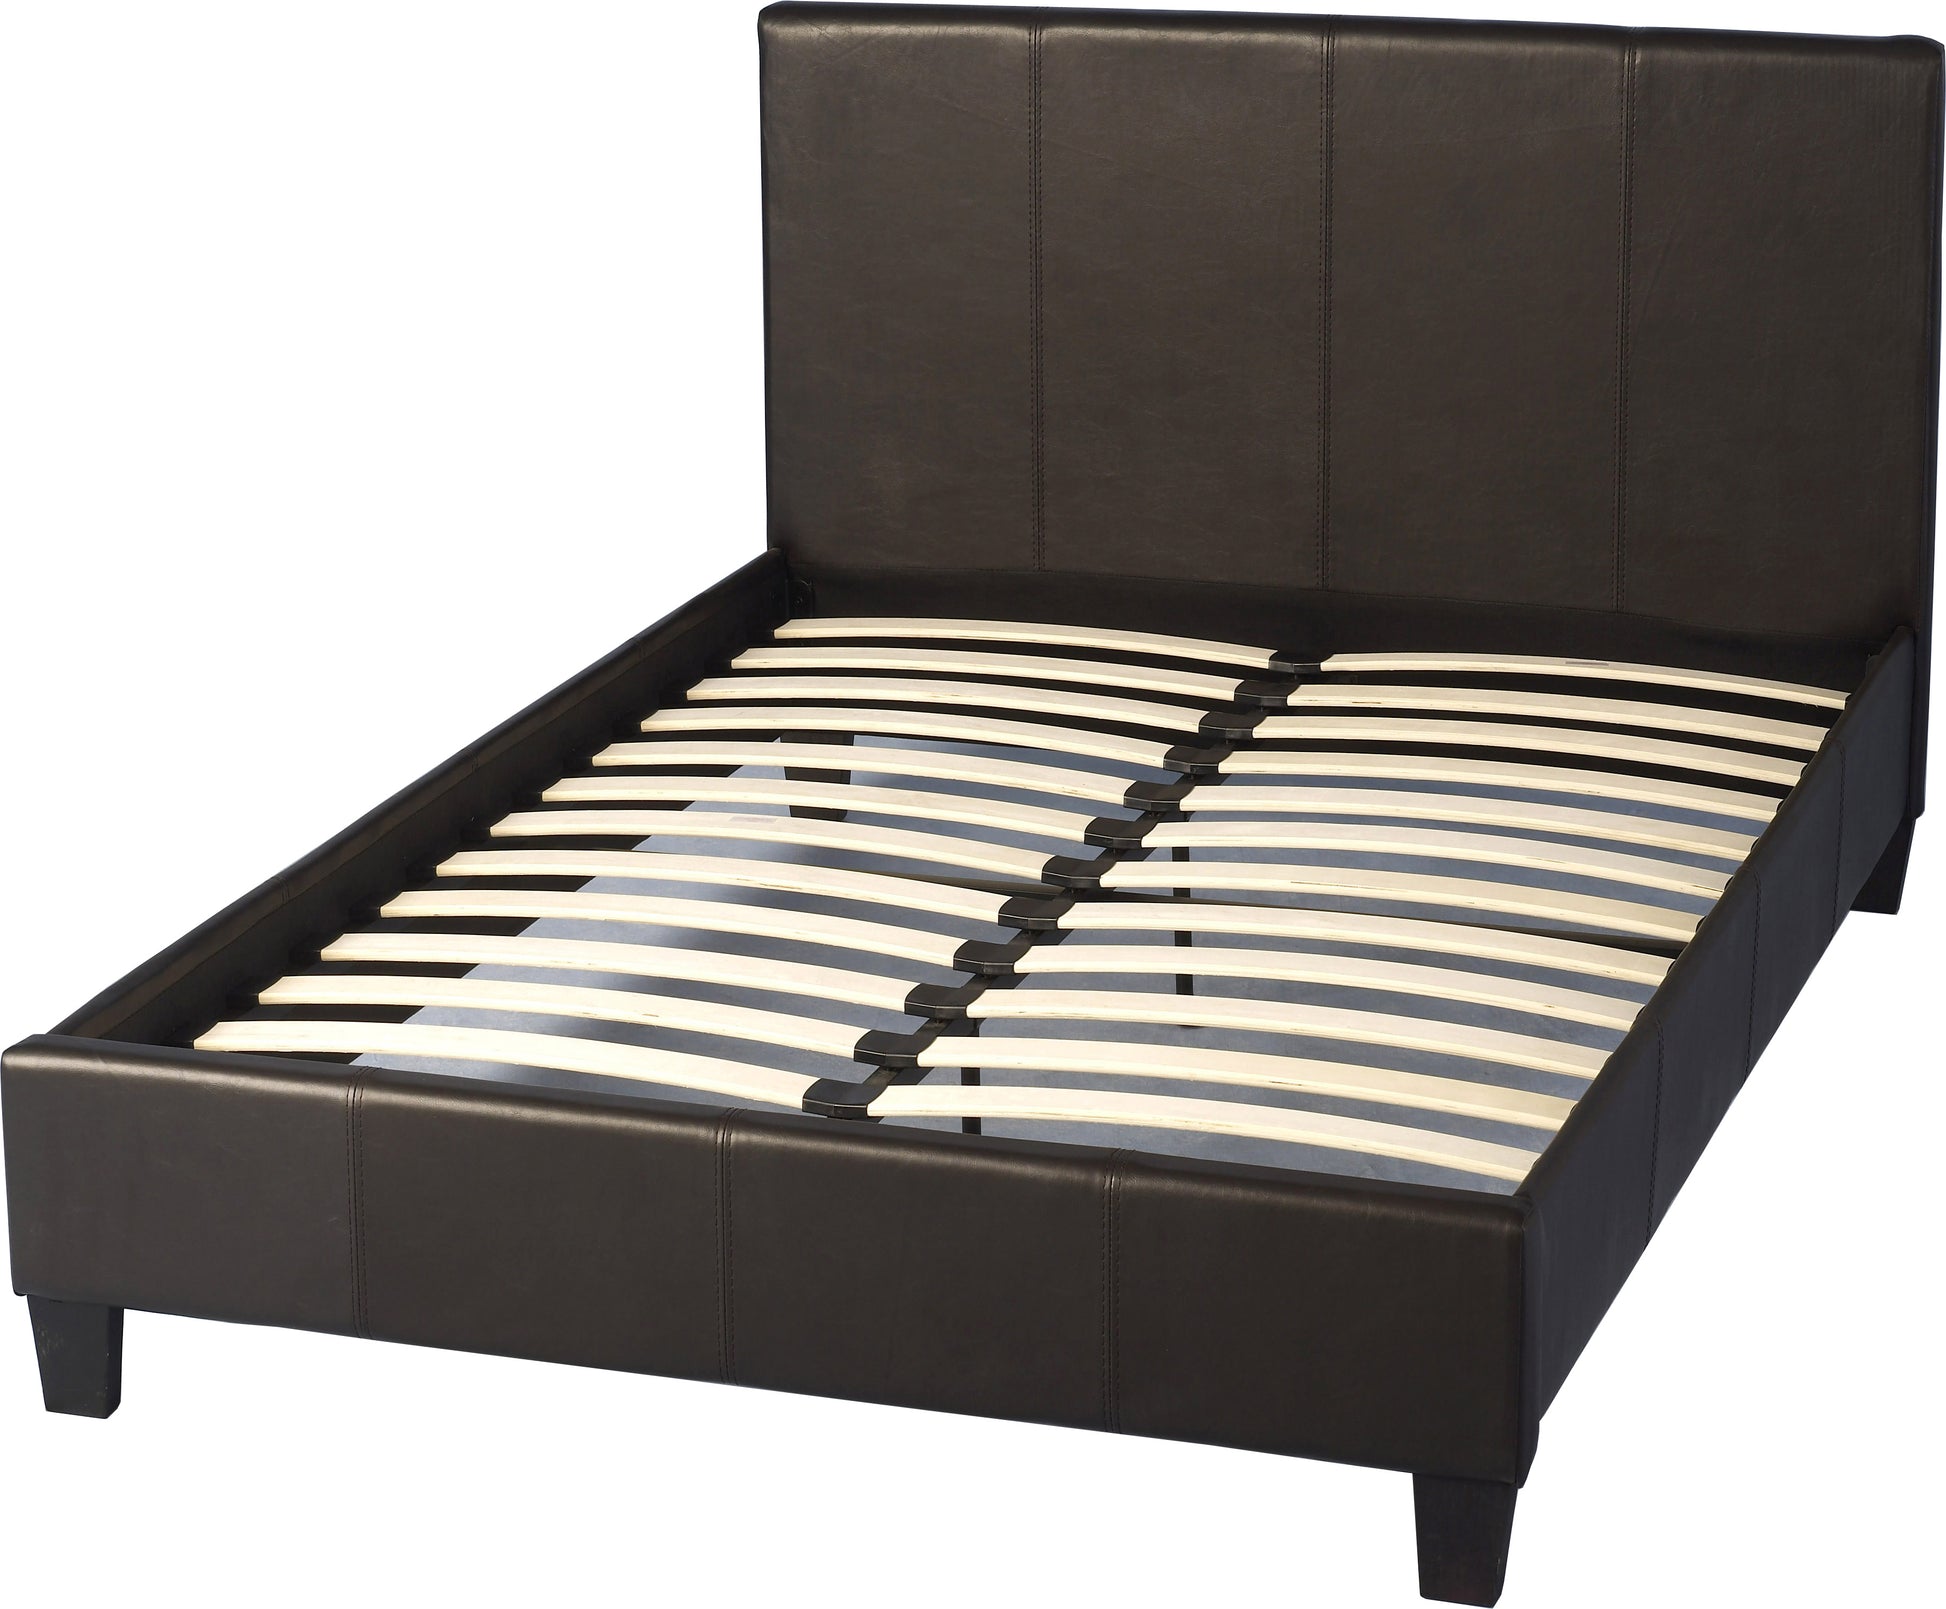 Prado 4' Small Double Bed- Brown Faux Leather